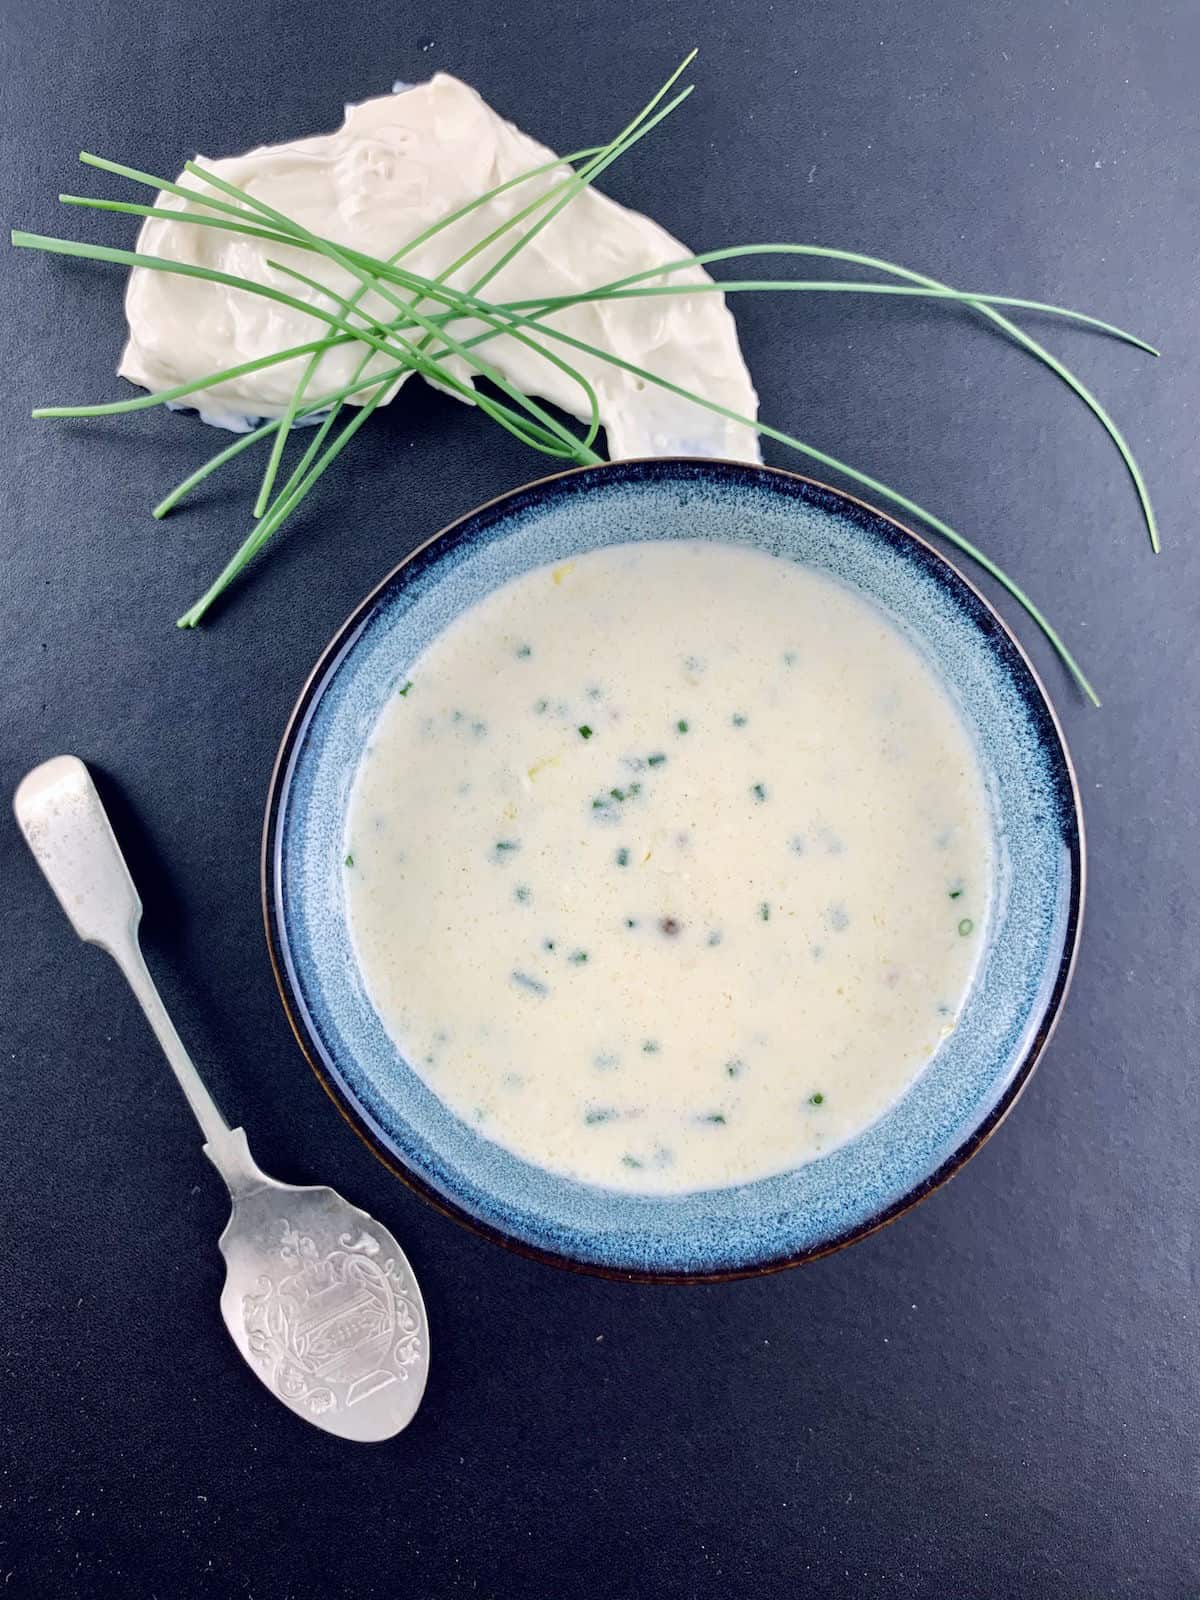 Buttermilk dressing in blue bowl with silver spoon, cream cheese and chives on the sidde